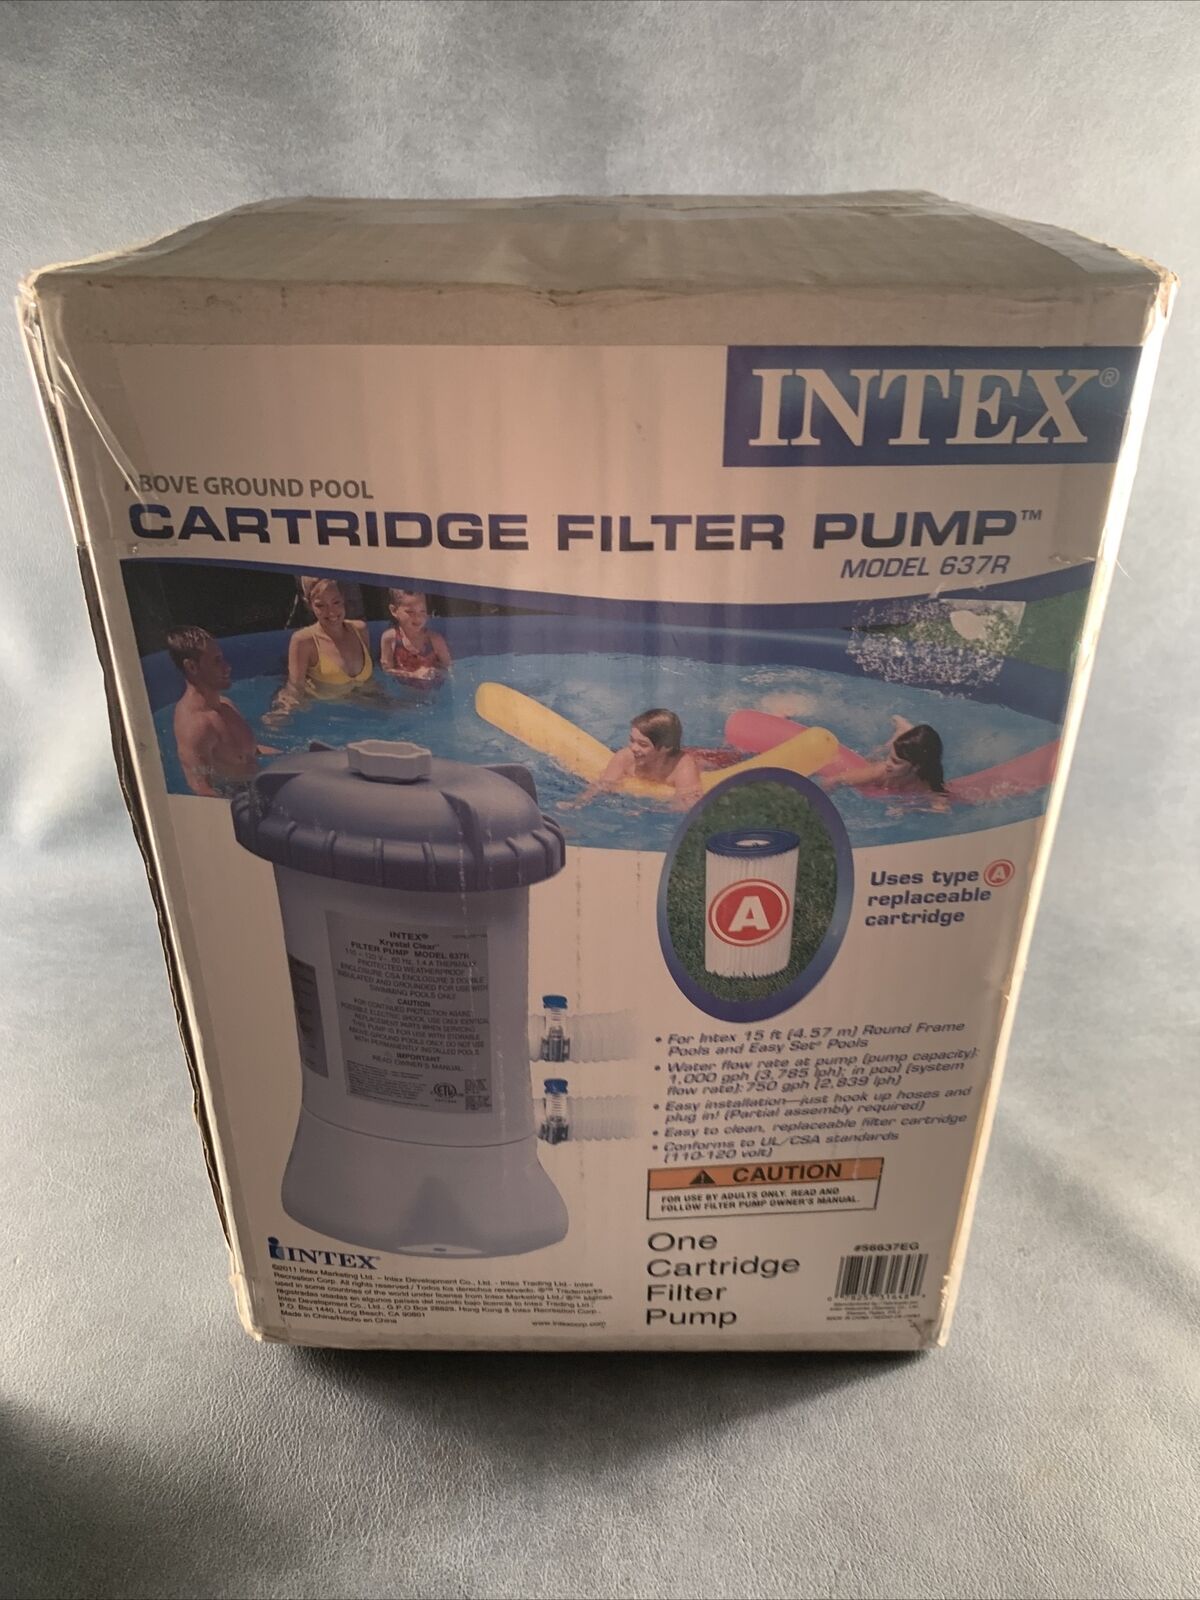 2021 autumn and winter new Intex 1000 GPH Cartridge Pool Filter In Pump Se 637R Direct sale of manufacturer New 28637EG